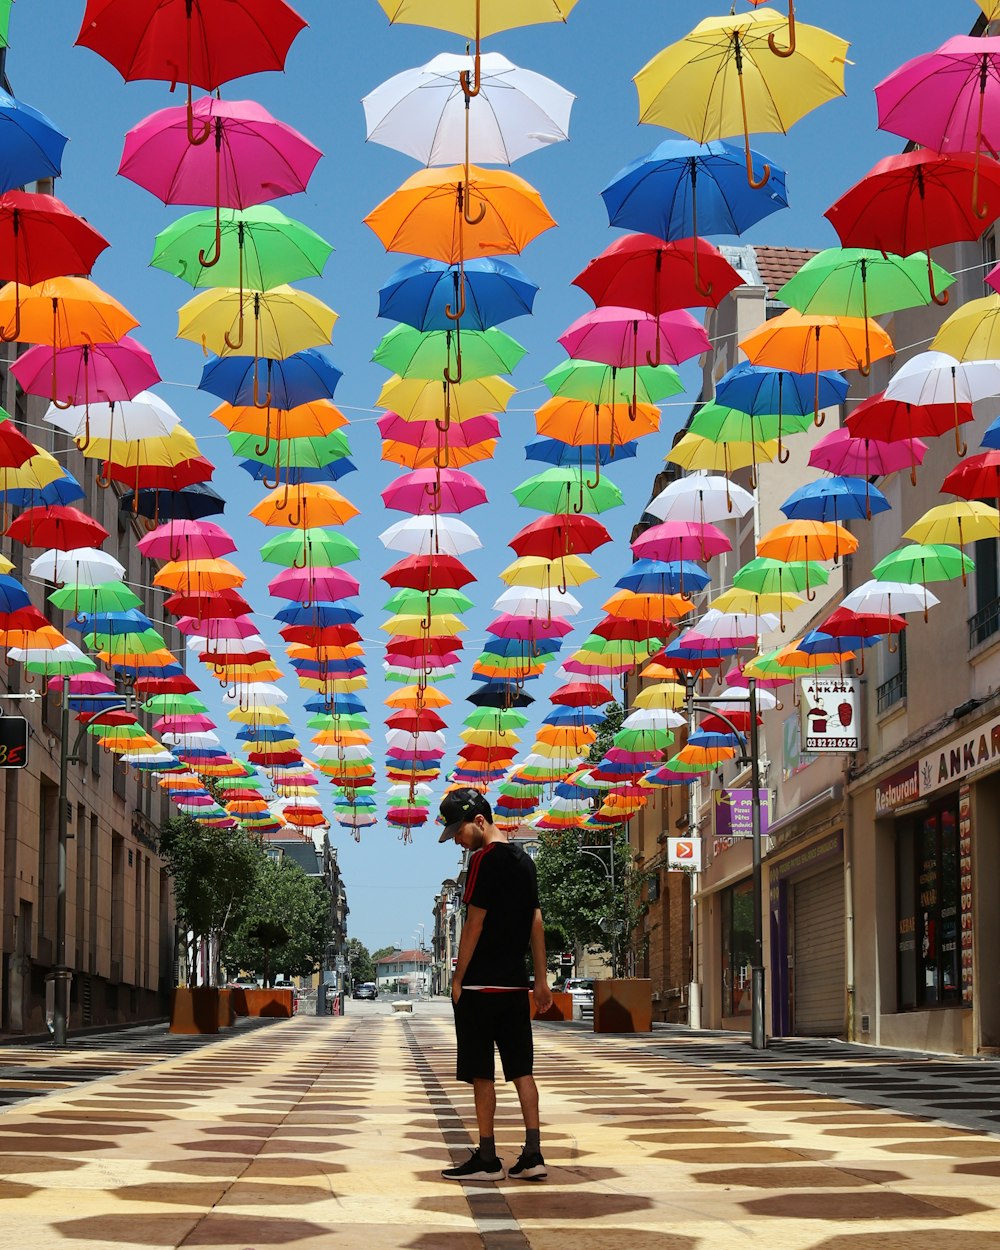 man standing under suspended multicolored umbrellas in street photo – Free  Person Image on Unsplash